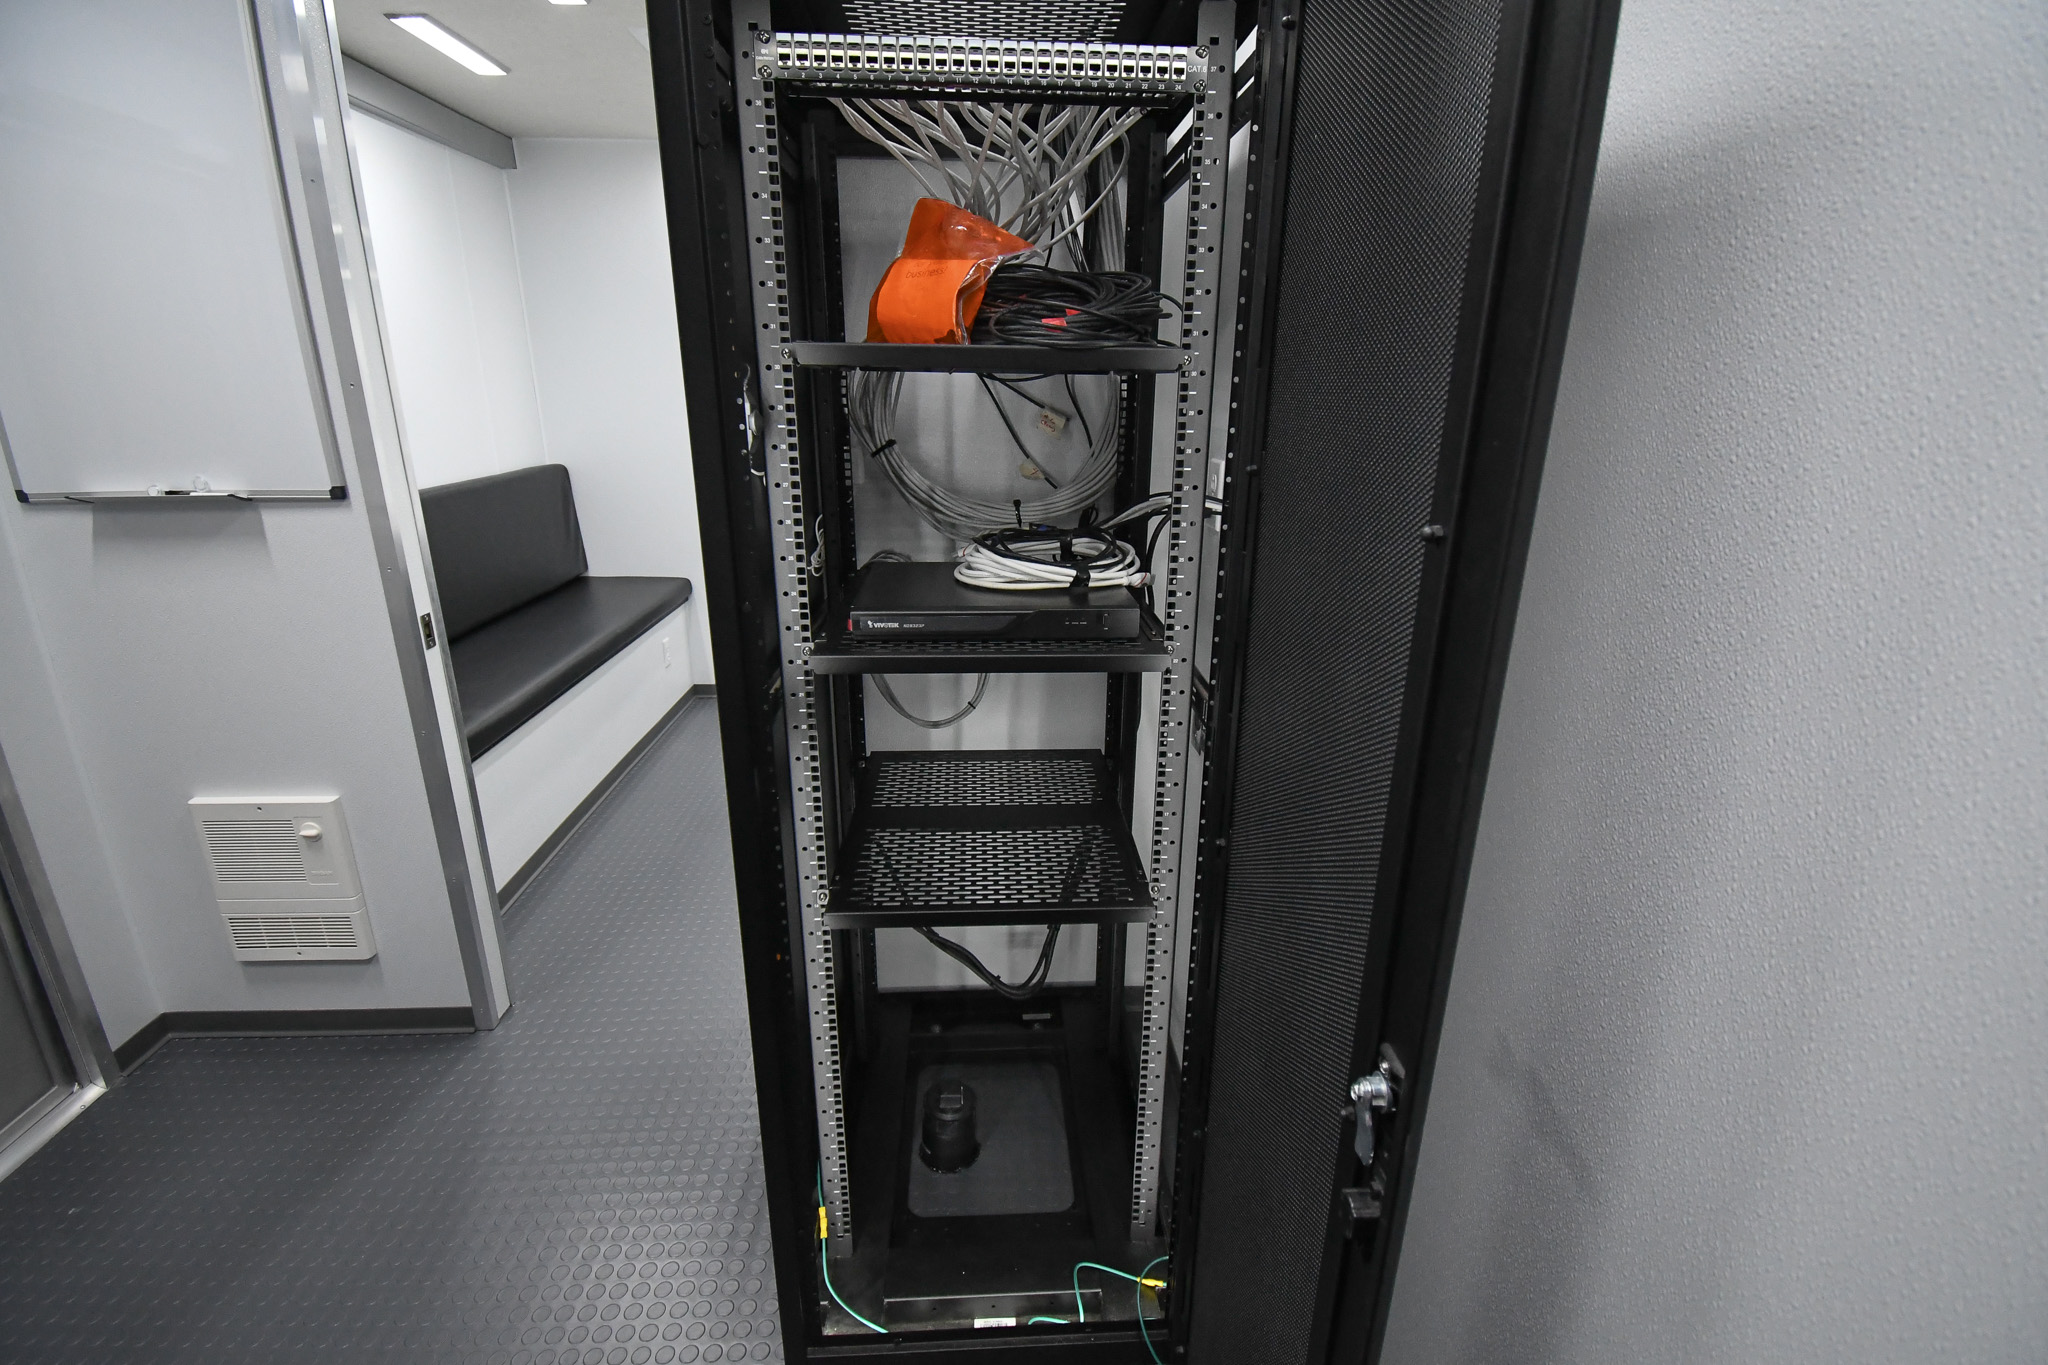 A view of the server rack cabinet inside the unit for Susquehanna County, PA.